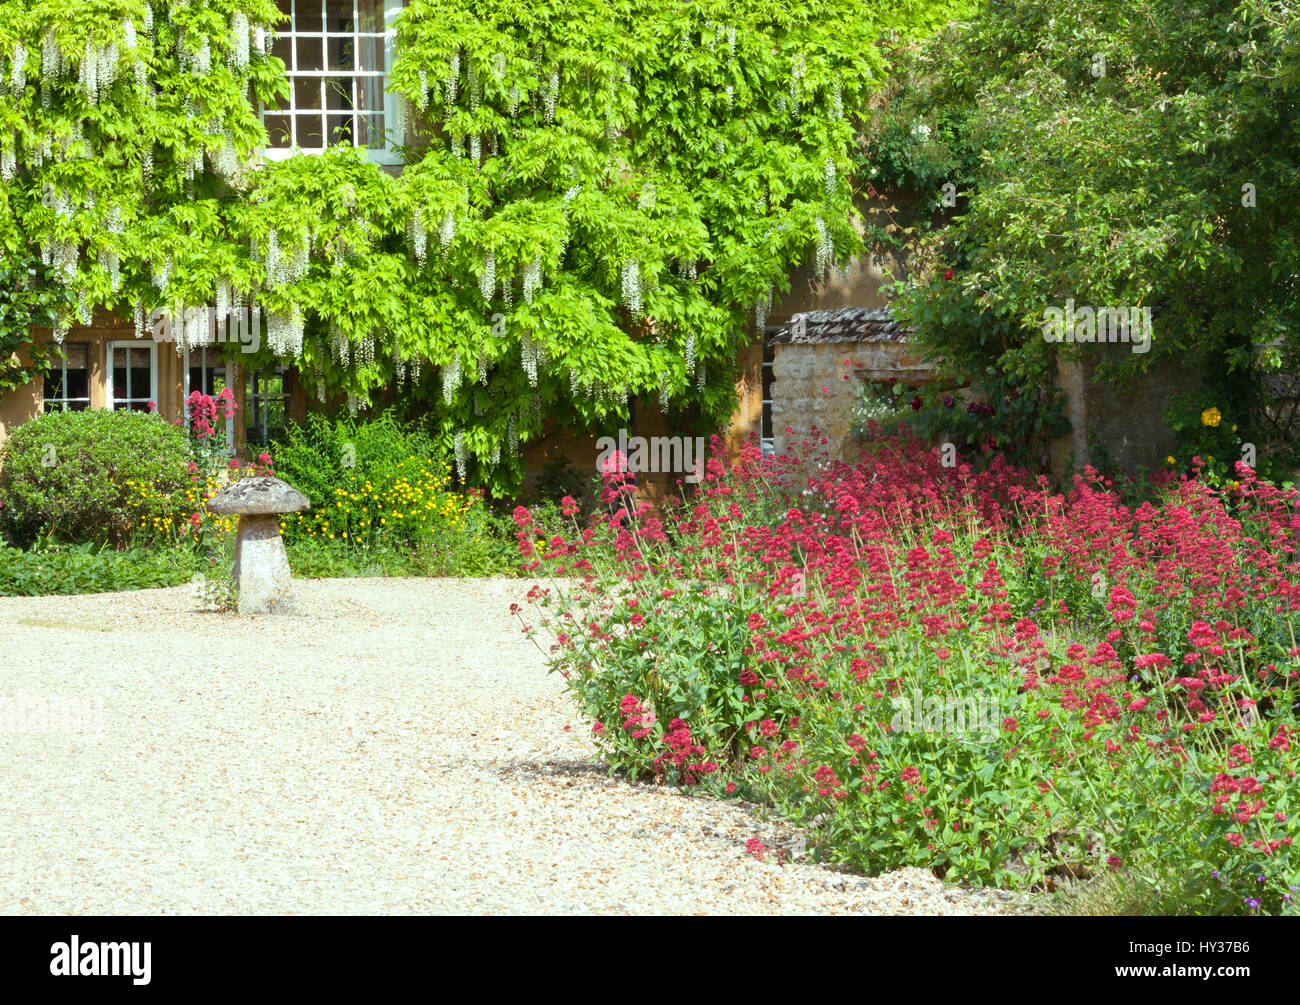 Front cottage garden with red flowers along stone driveway, house wall covered by white wisteria plant in bloom . Stock Photo